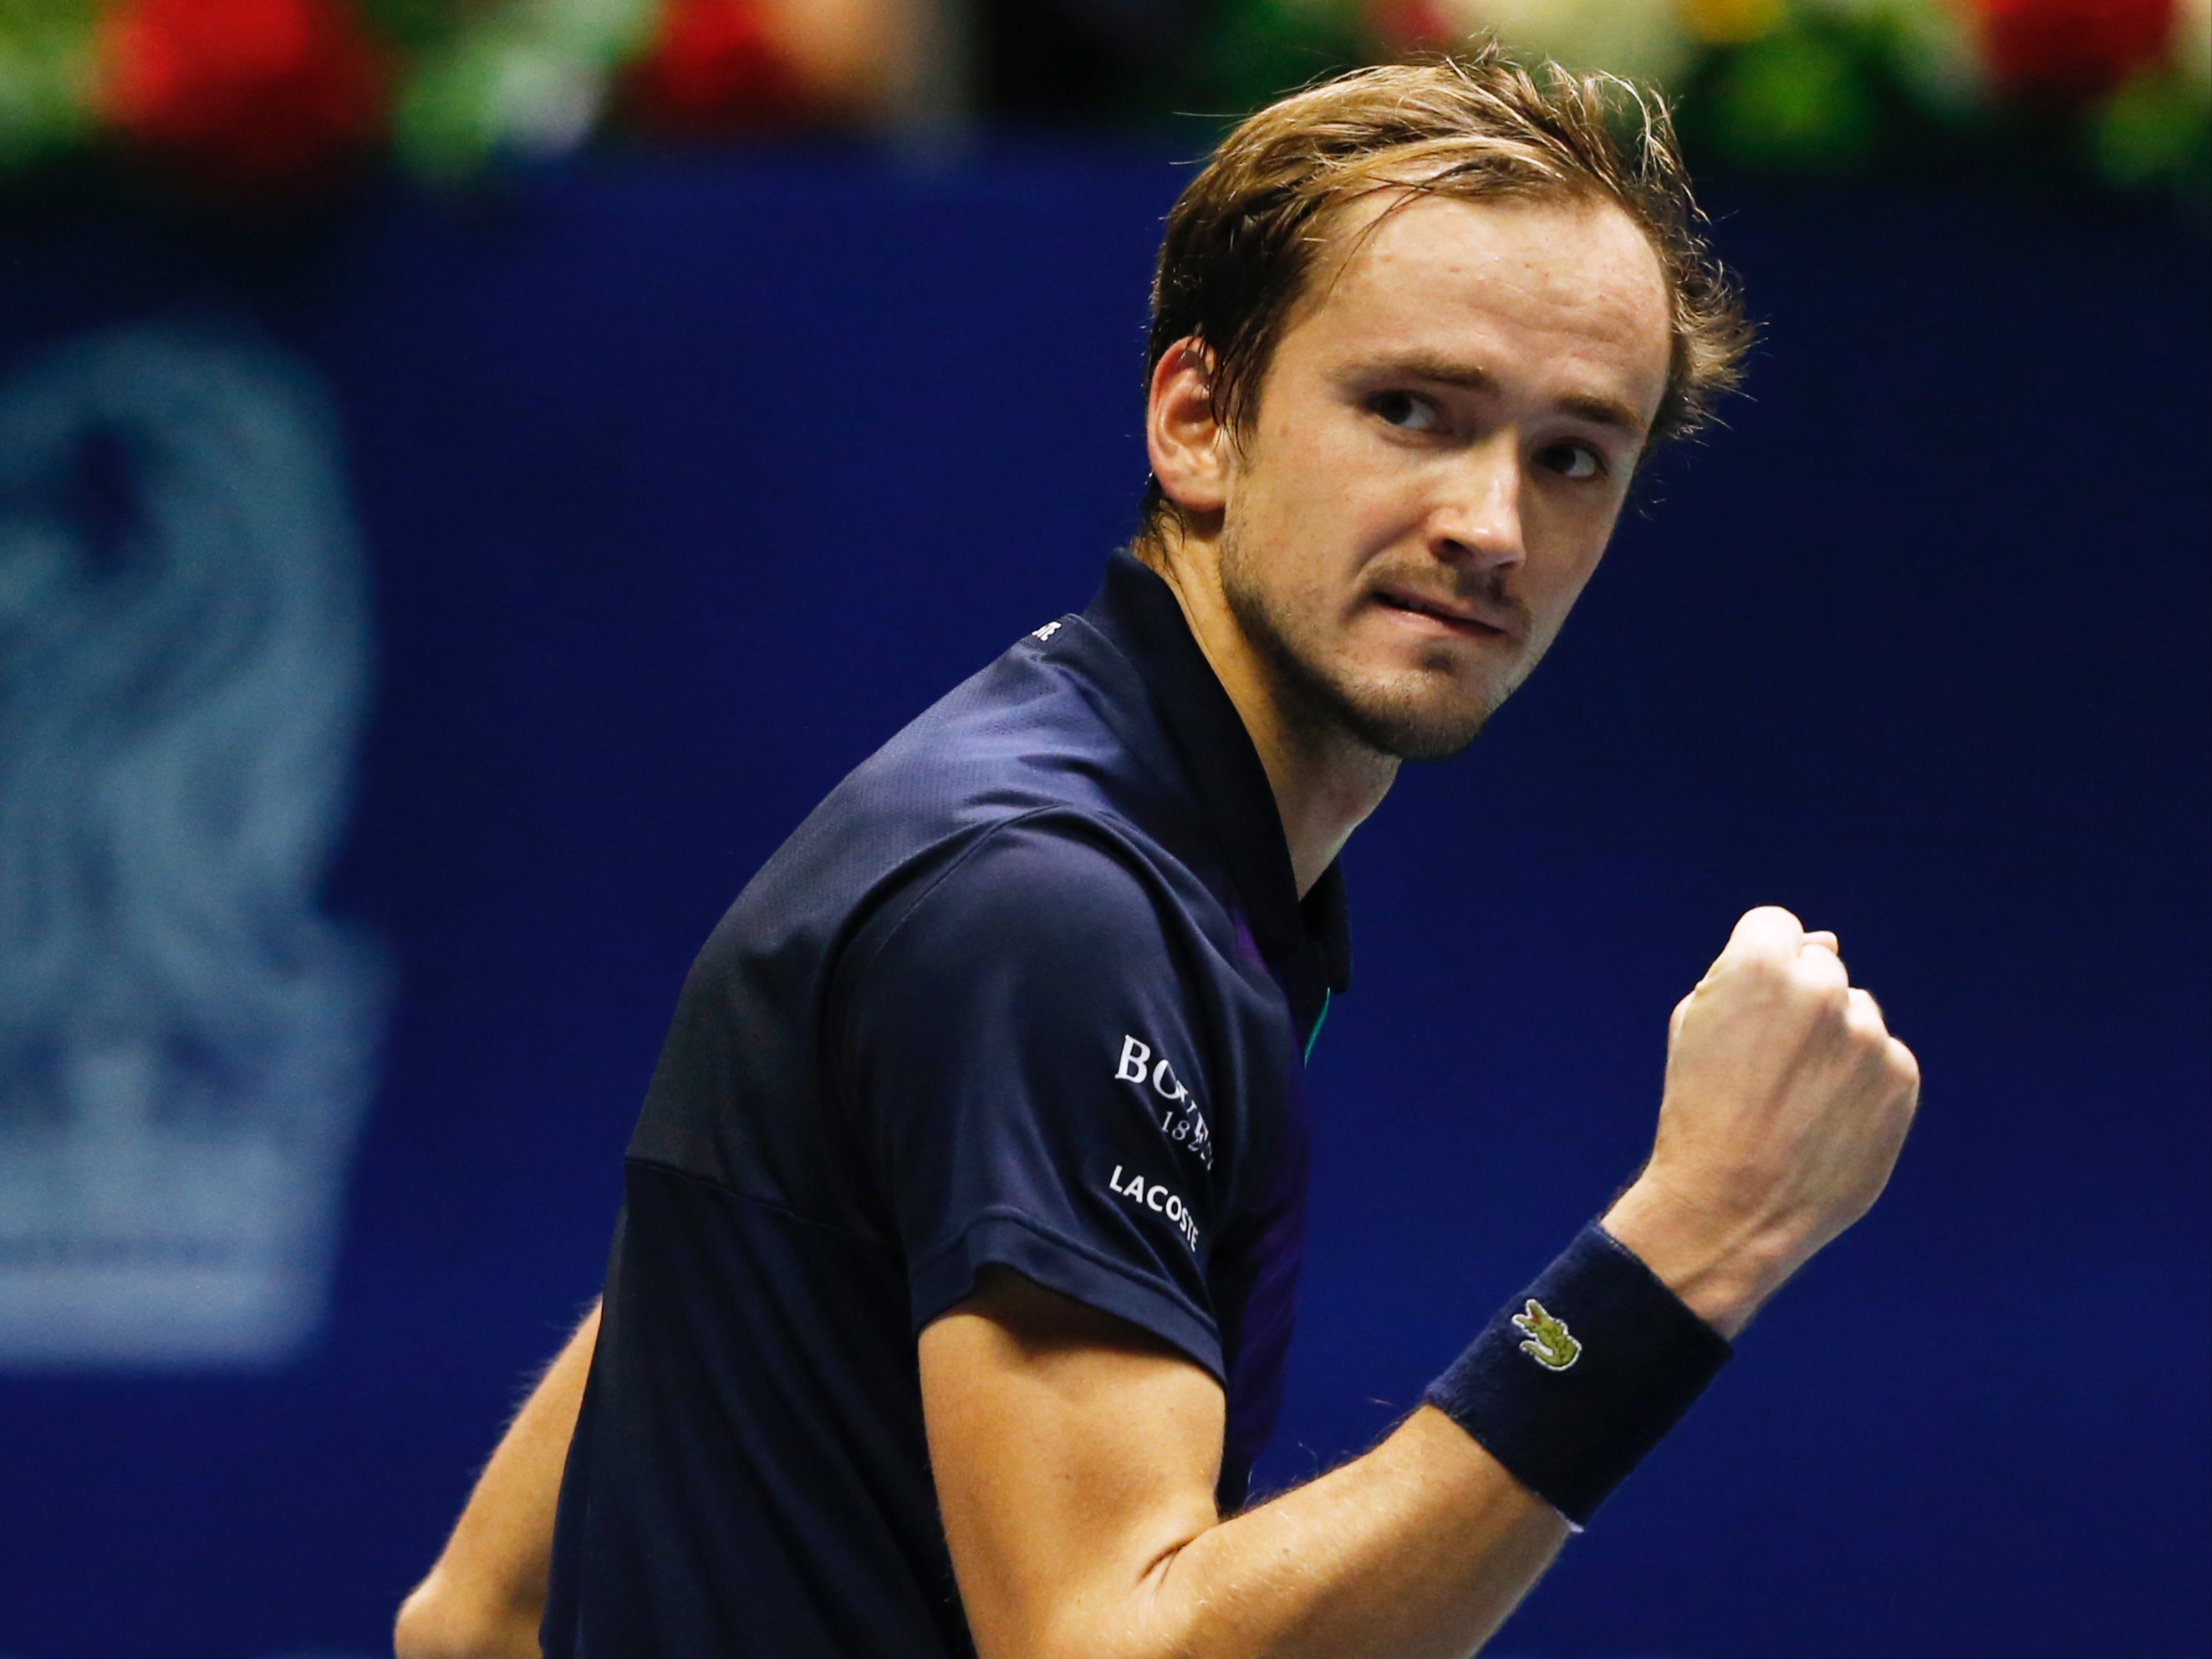 Players such as Daniil Medvedev will be free to play in Melbourne as neutrals